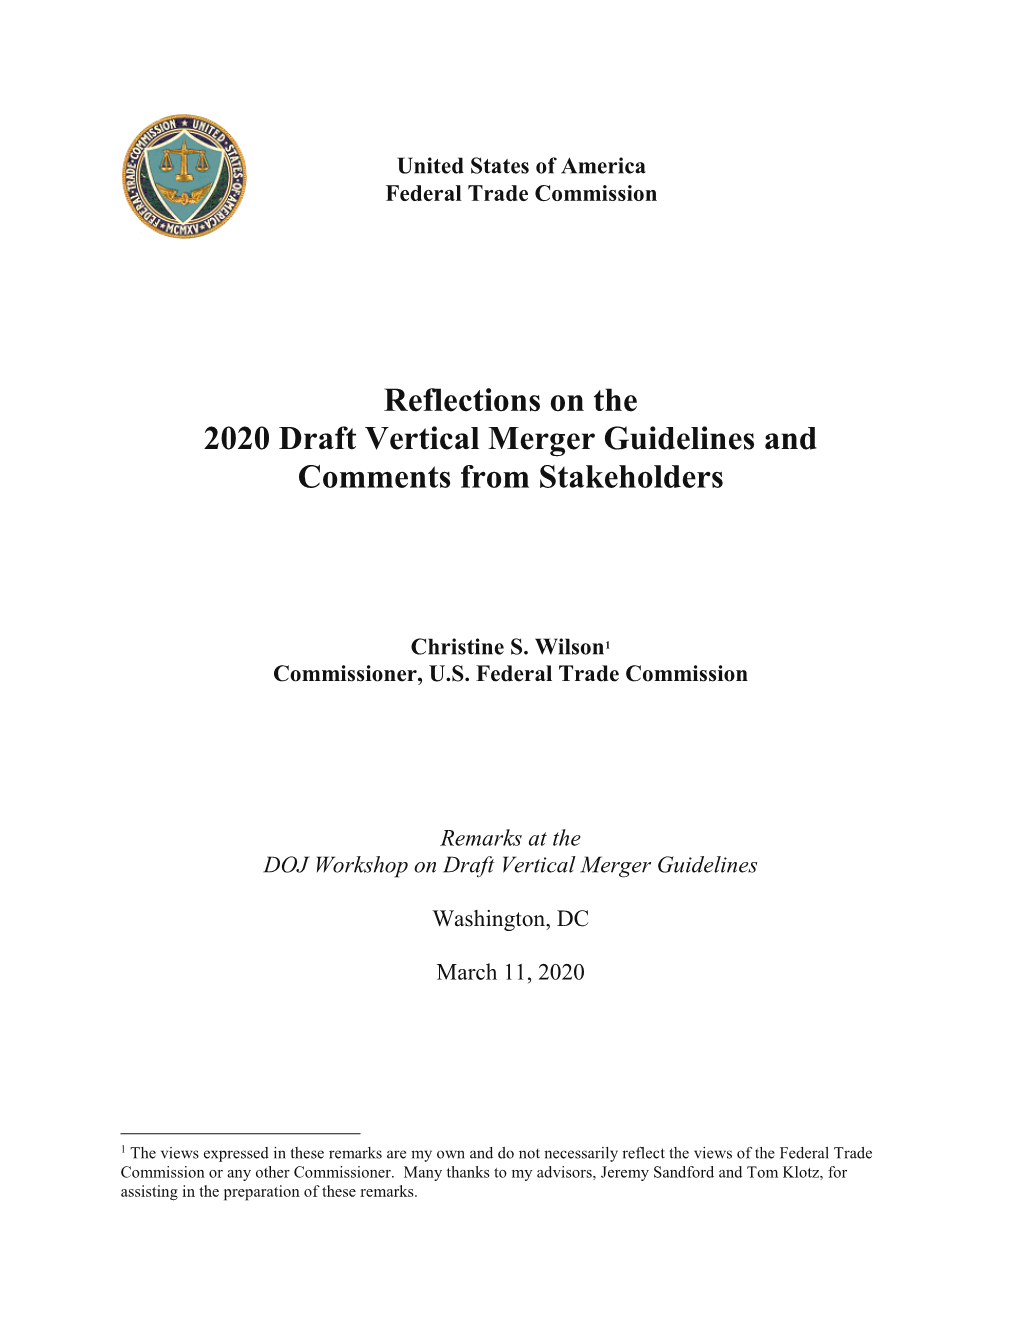 Reflections on the 2020 Draft Vertical Merger Guidelines and Comments from Stakeholders